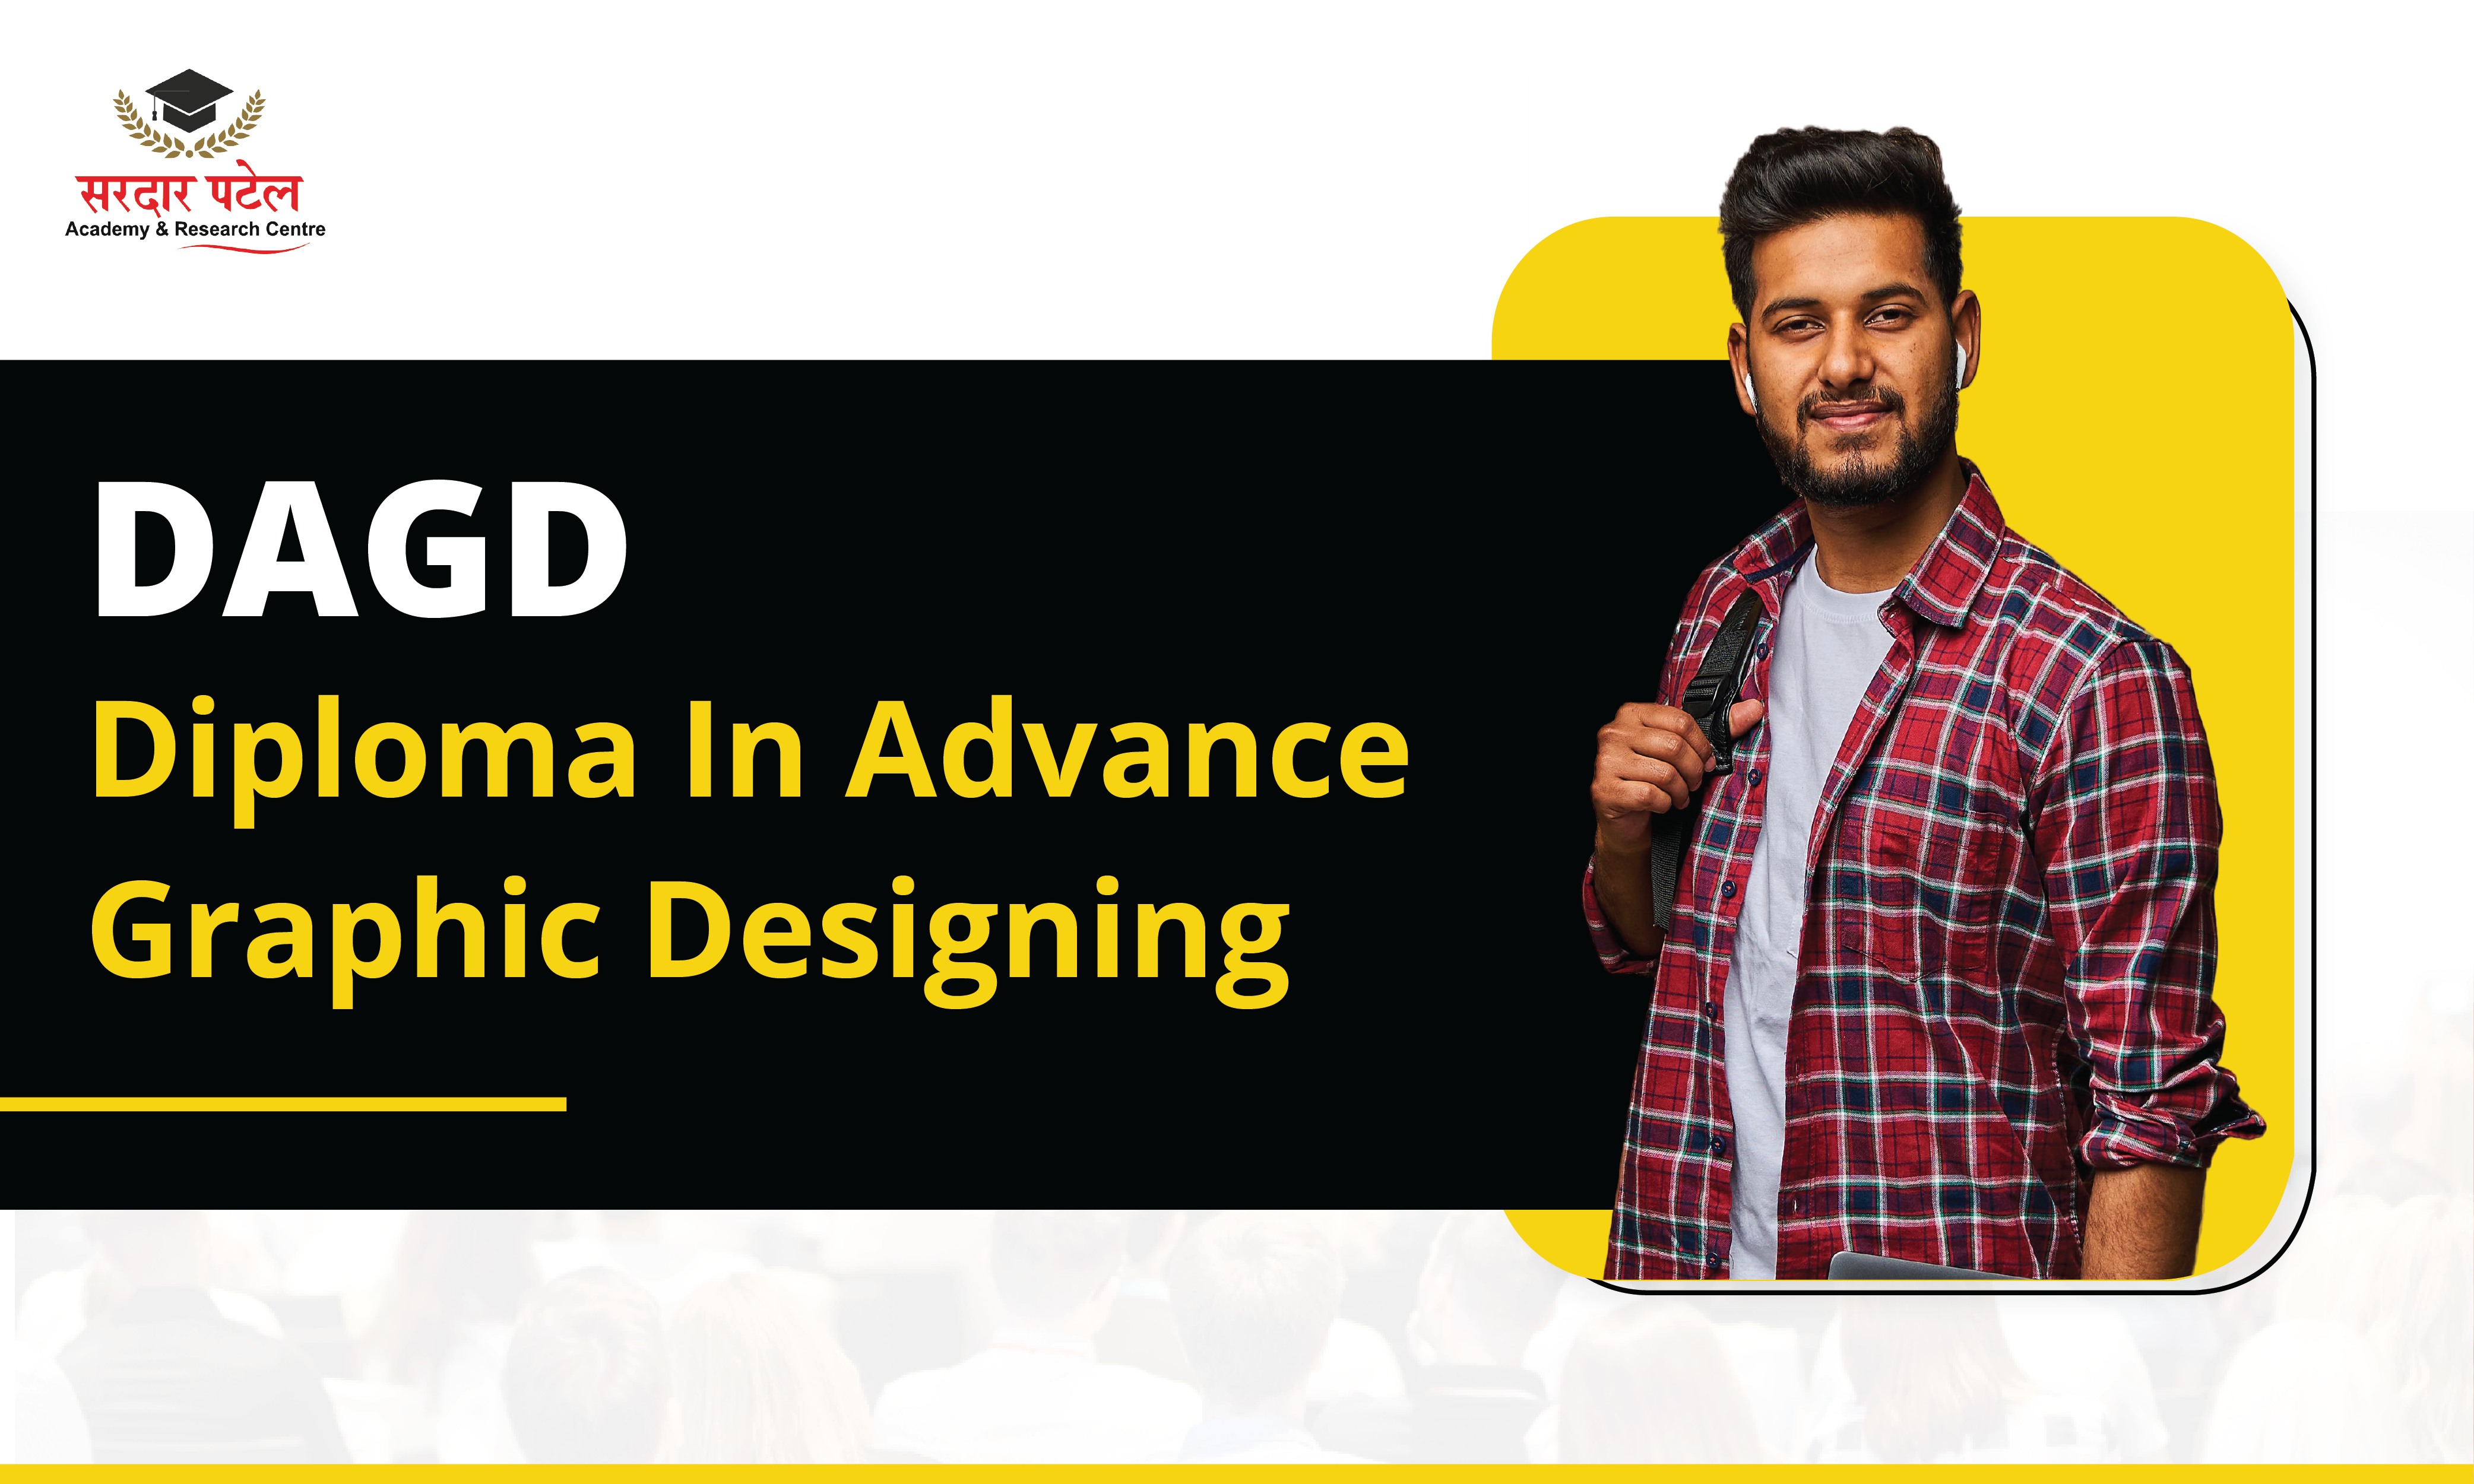 Diploma In Advance Graphic Designing - DAGD